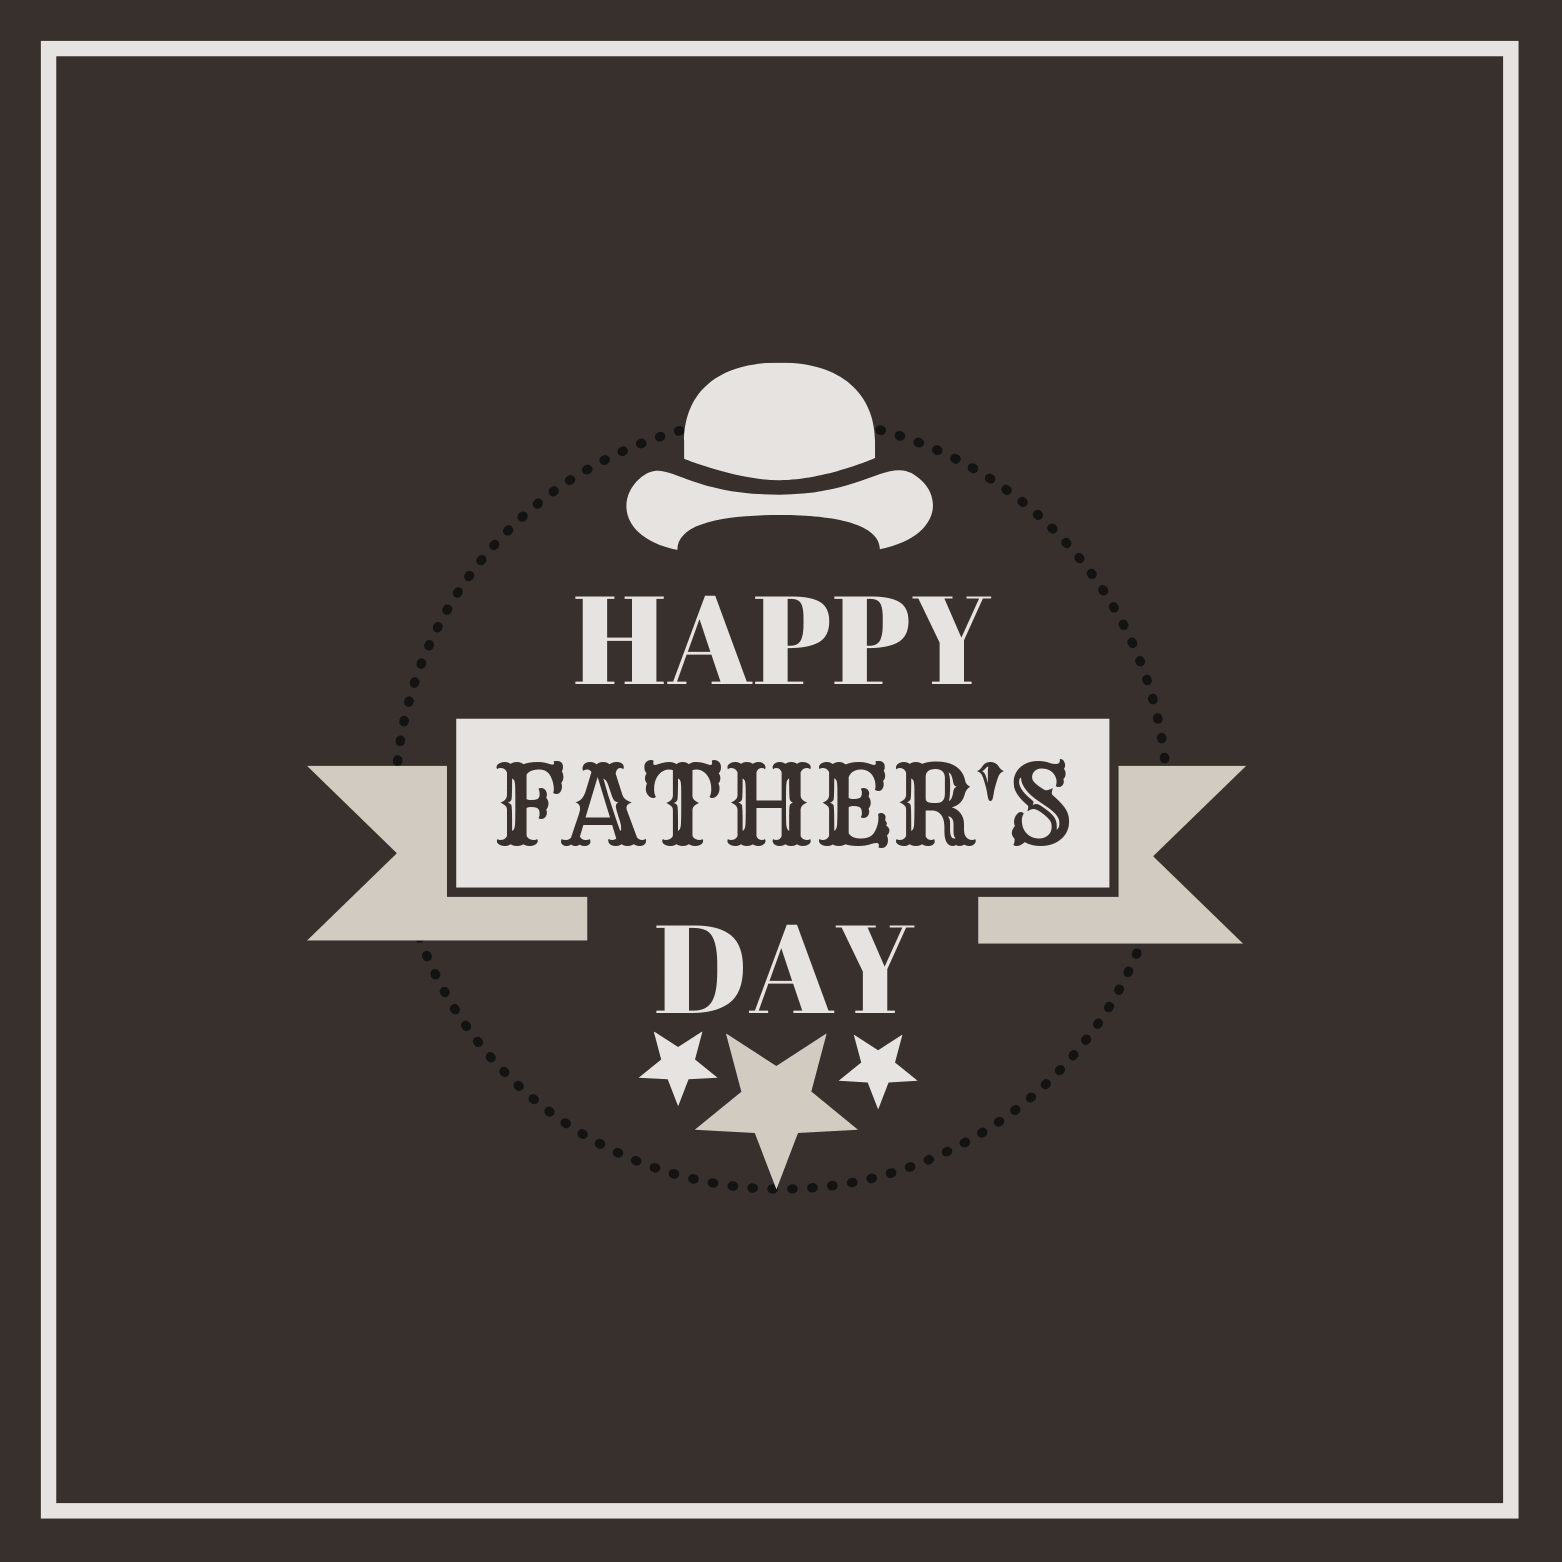 15+ Fun Father's Day Card Templates To Show Your Dad He's #1 With Fathers Day Card Template